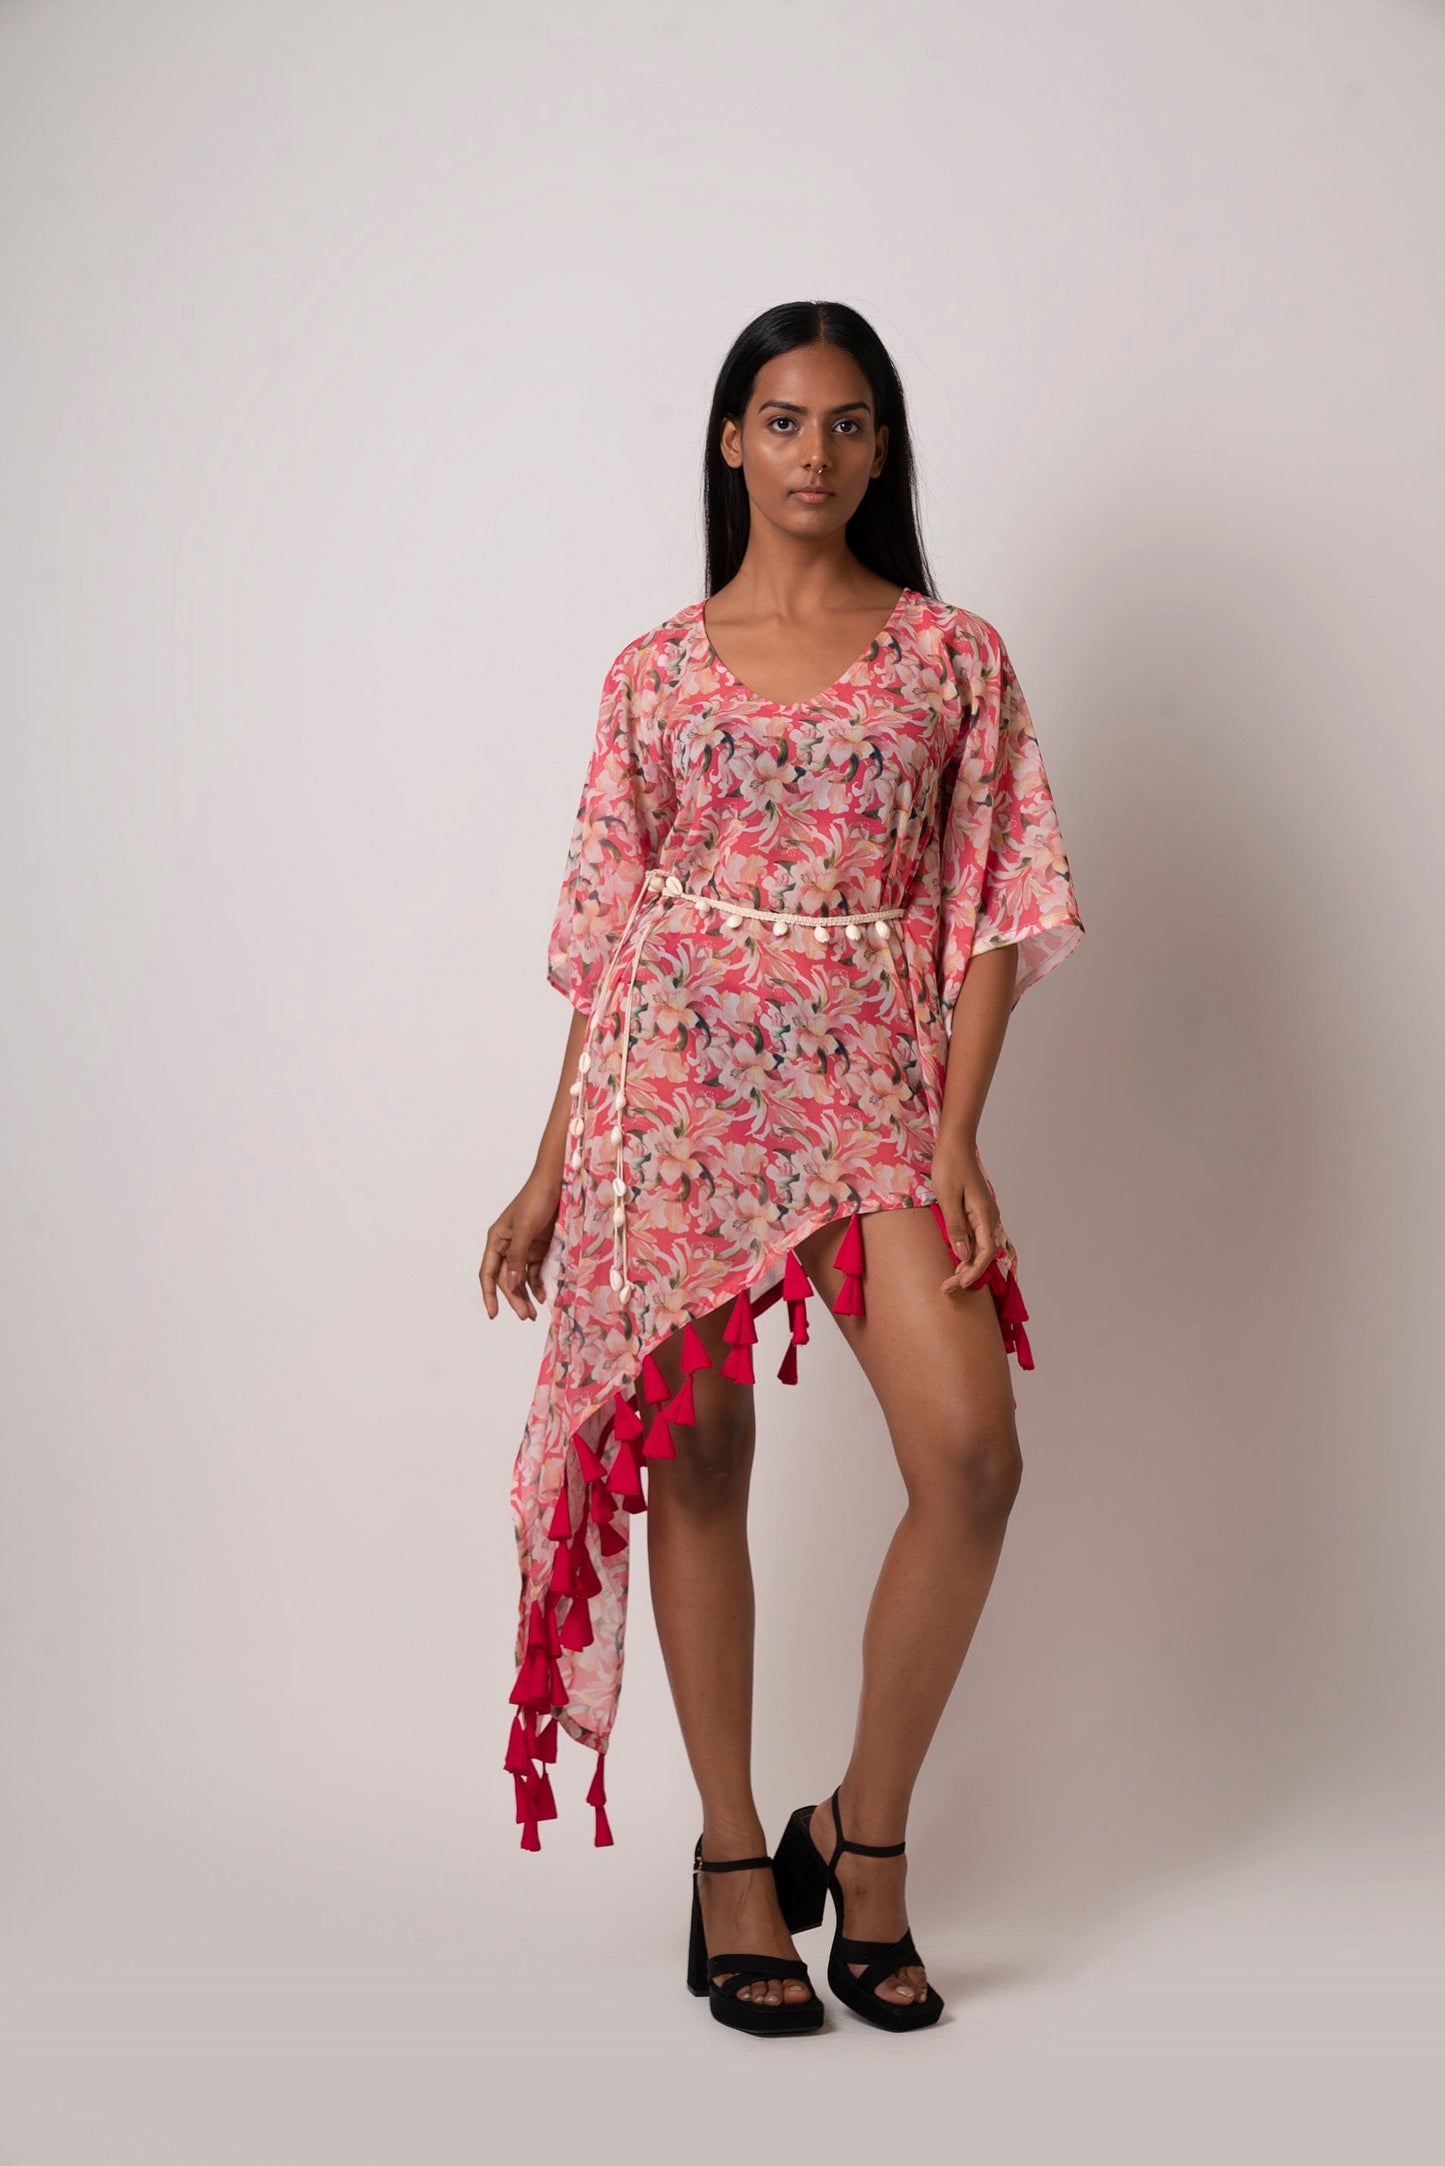 This red floral beach dress is perfect as summer beach wear for women.  Its lightweight fabric, flowy silhouette, and kimono-style sleeves make it comfortable to wear all day. The sea shell belt cinches at the waist, giving you a perfectly flattering look. 